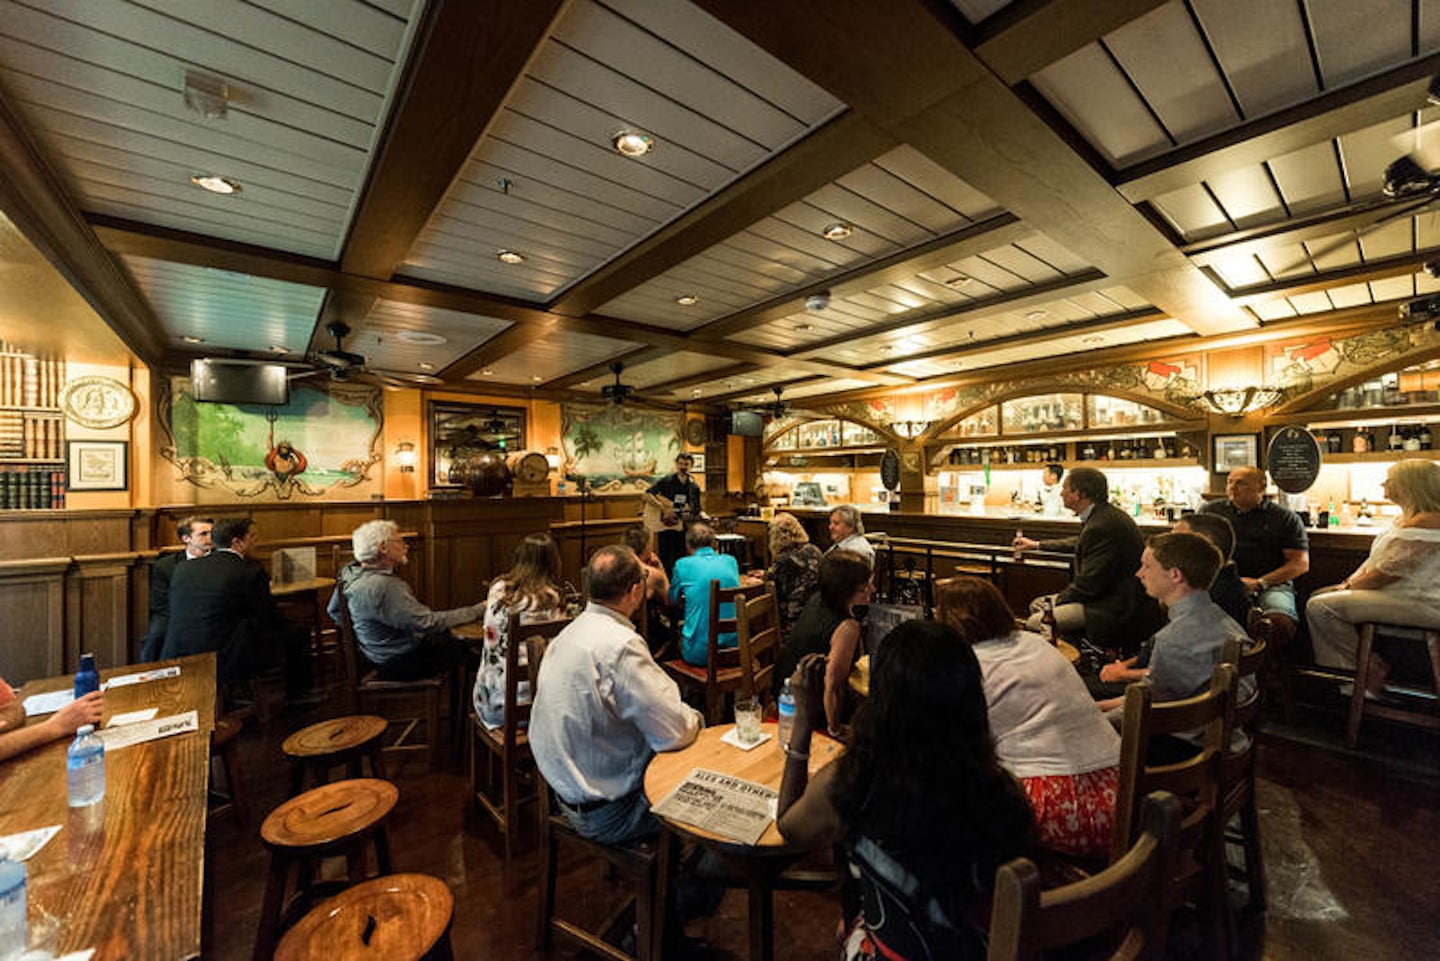 The Duck and Dog Pub on Adventure of the Seas